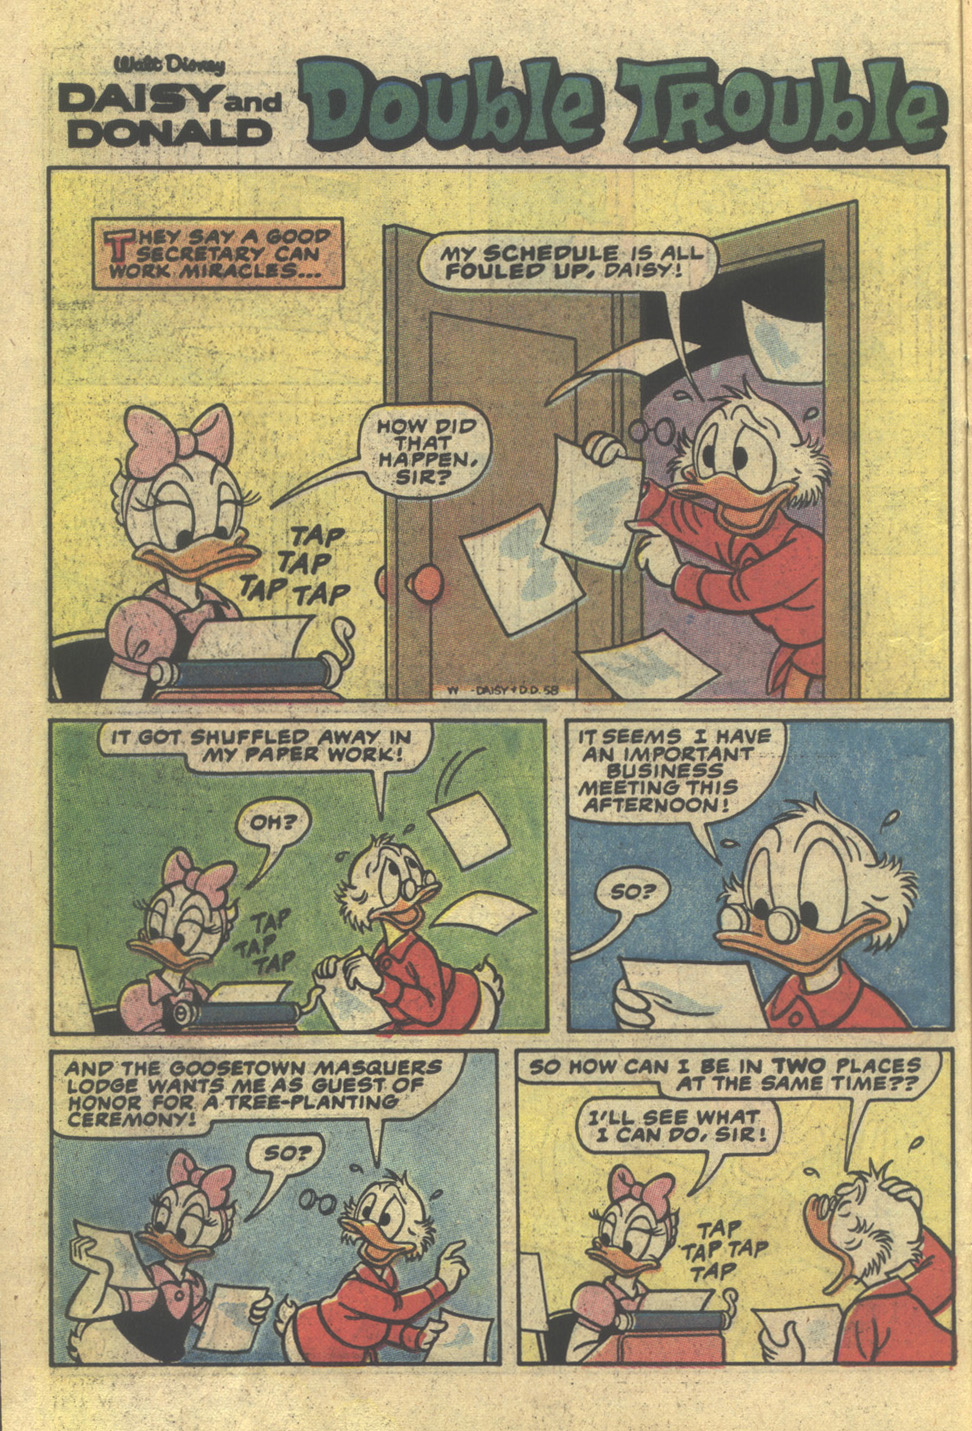 Read online Walt Disney Daisy and Donald comic -  Issue #58 - 10